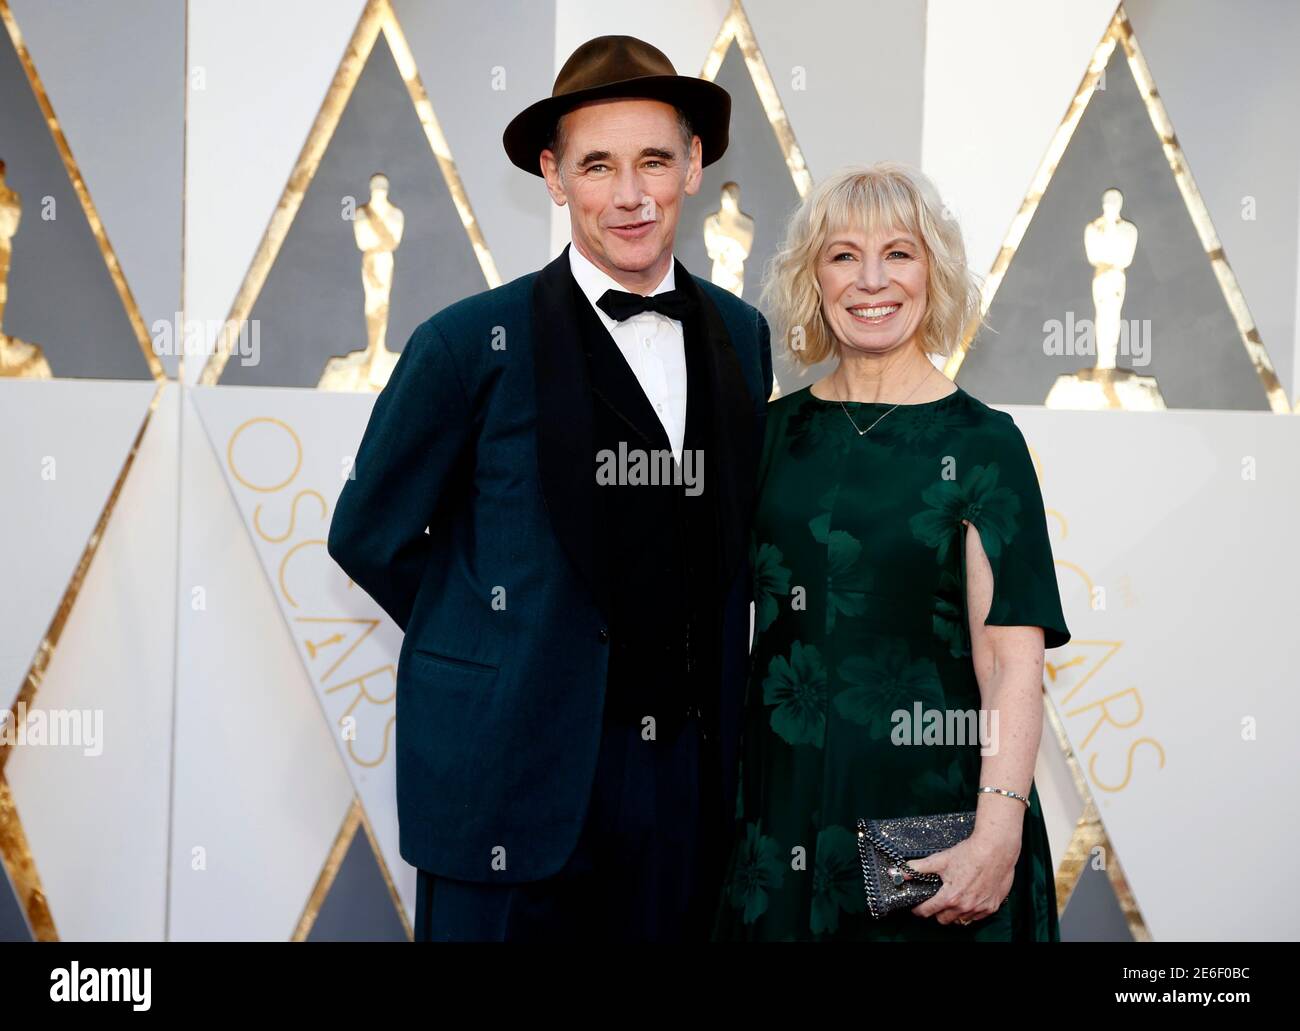 Mark Rylance, nominated for Best Supporting Actor for his role in 'Bridge of Spies,' arrives with wife Claire van Kampen at the 88th Academy Awards in Hollywood, California February 28, 2016.  REUTERS/Lucy Nicholson Stock Photo